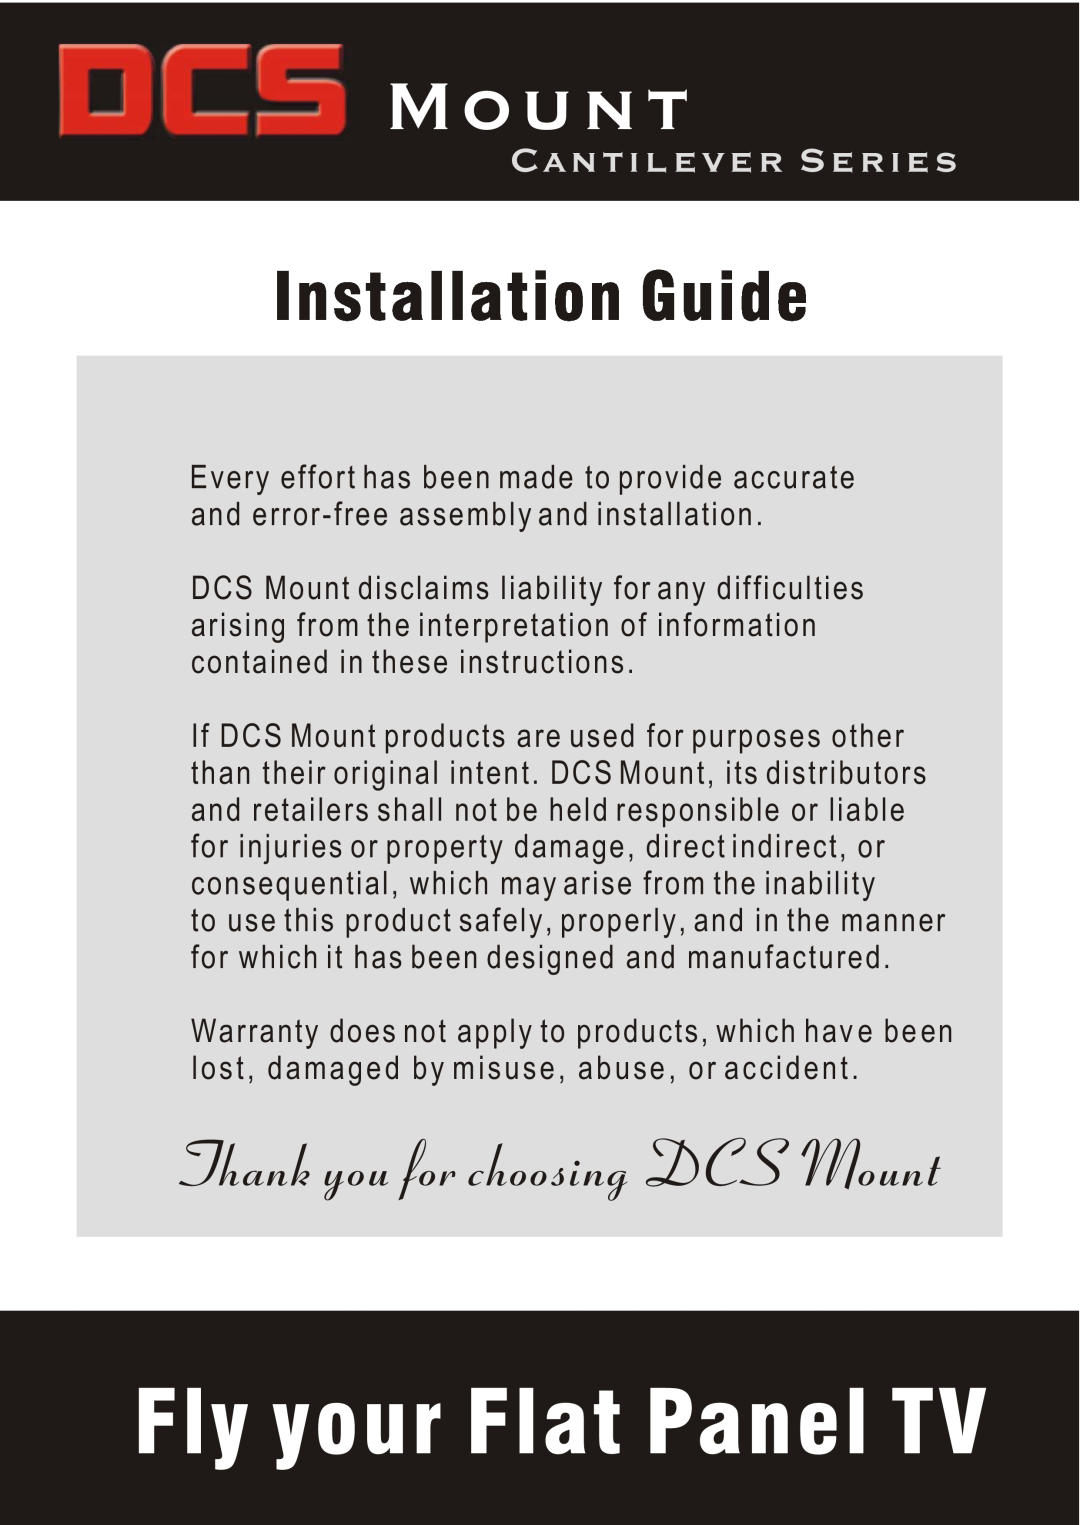 DCS warranty Fly your Flat Panel TV, Installation Guide, Thank you for choosing DCS Mount, Cantilever Series 